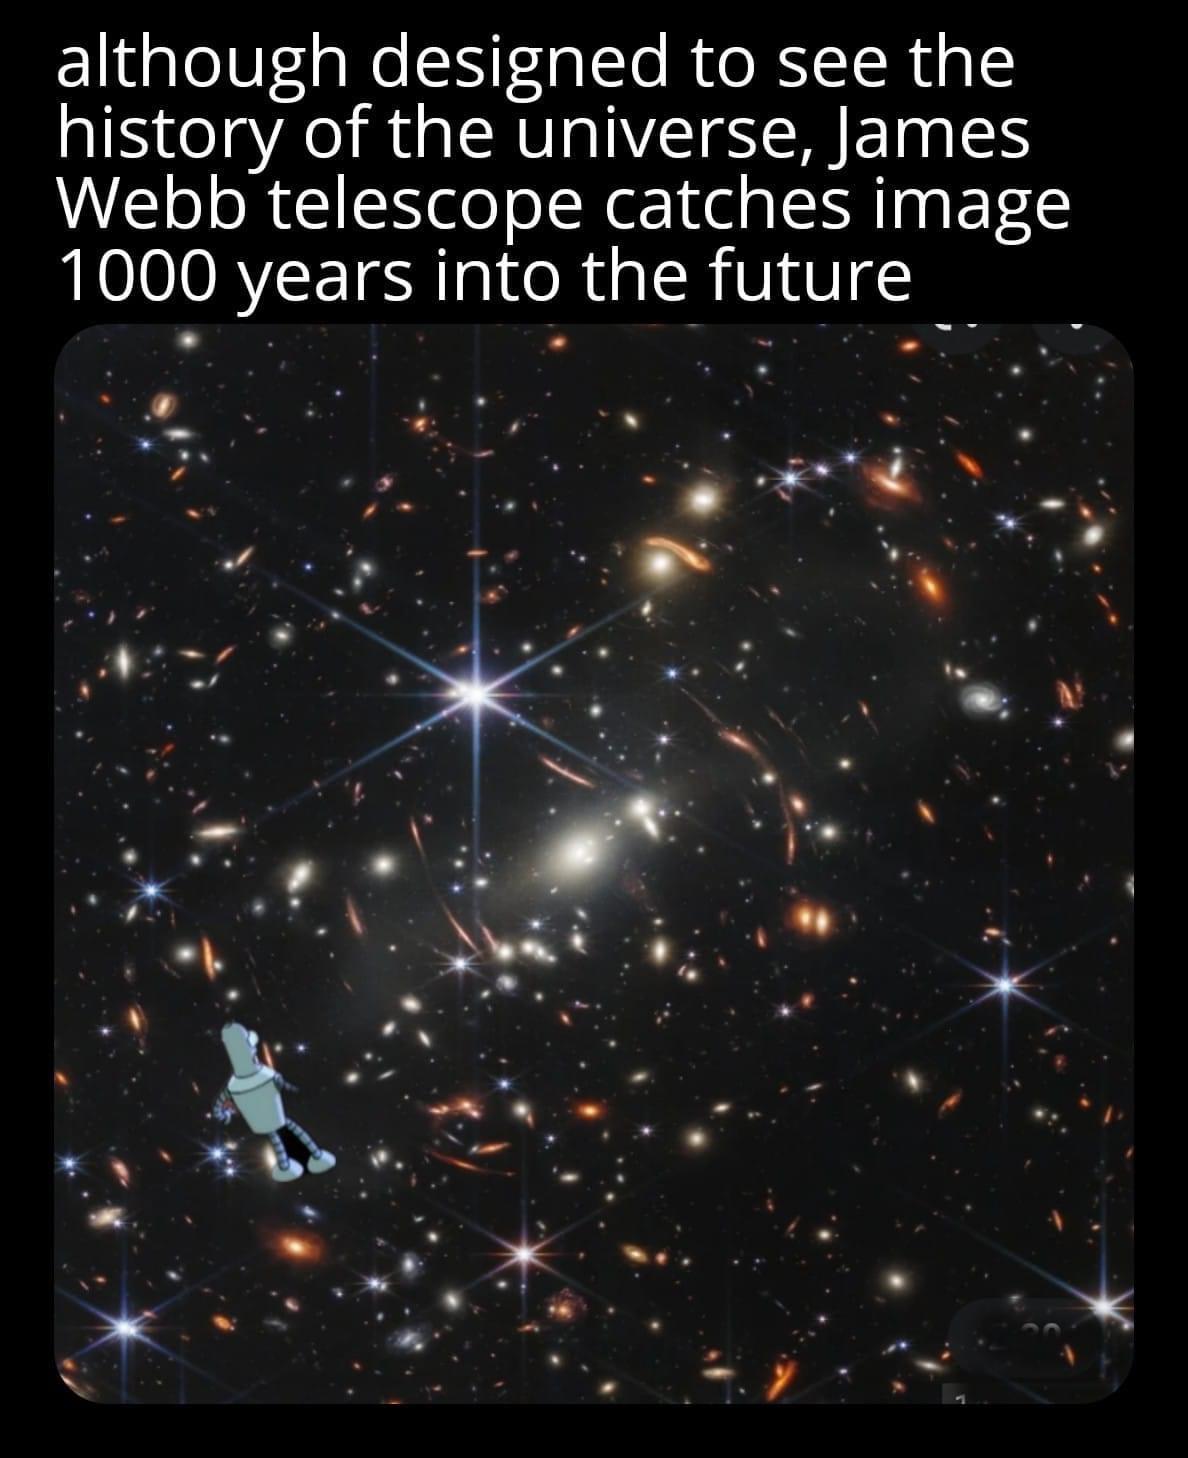 funny memes - dank memes - quotes - although designed to see the history of the universe, James Webb telescope catches image 1000 years into the future